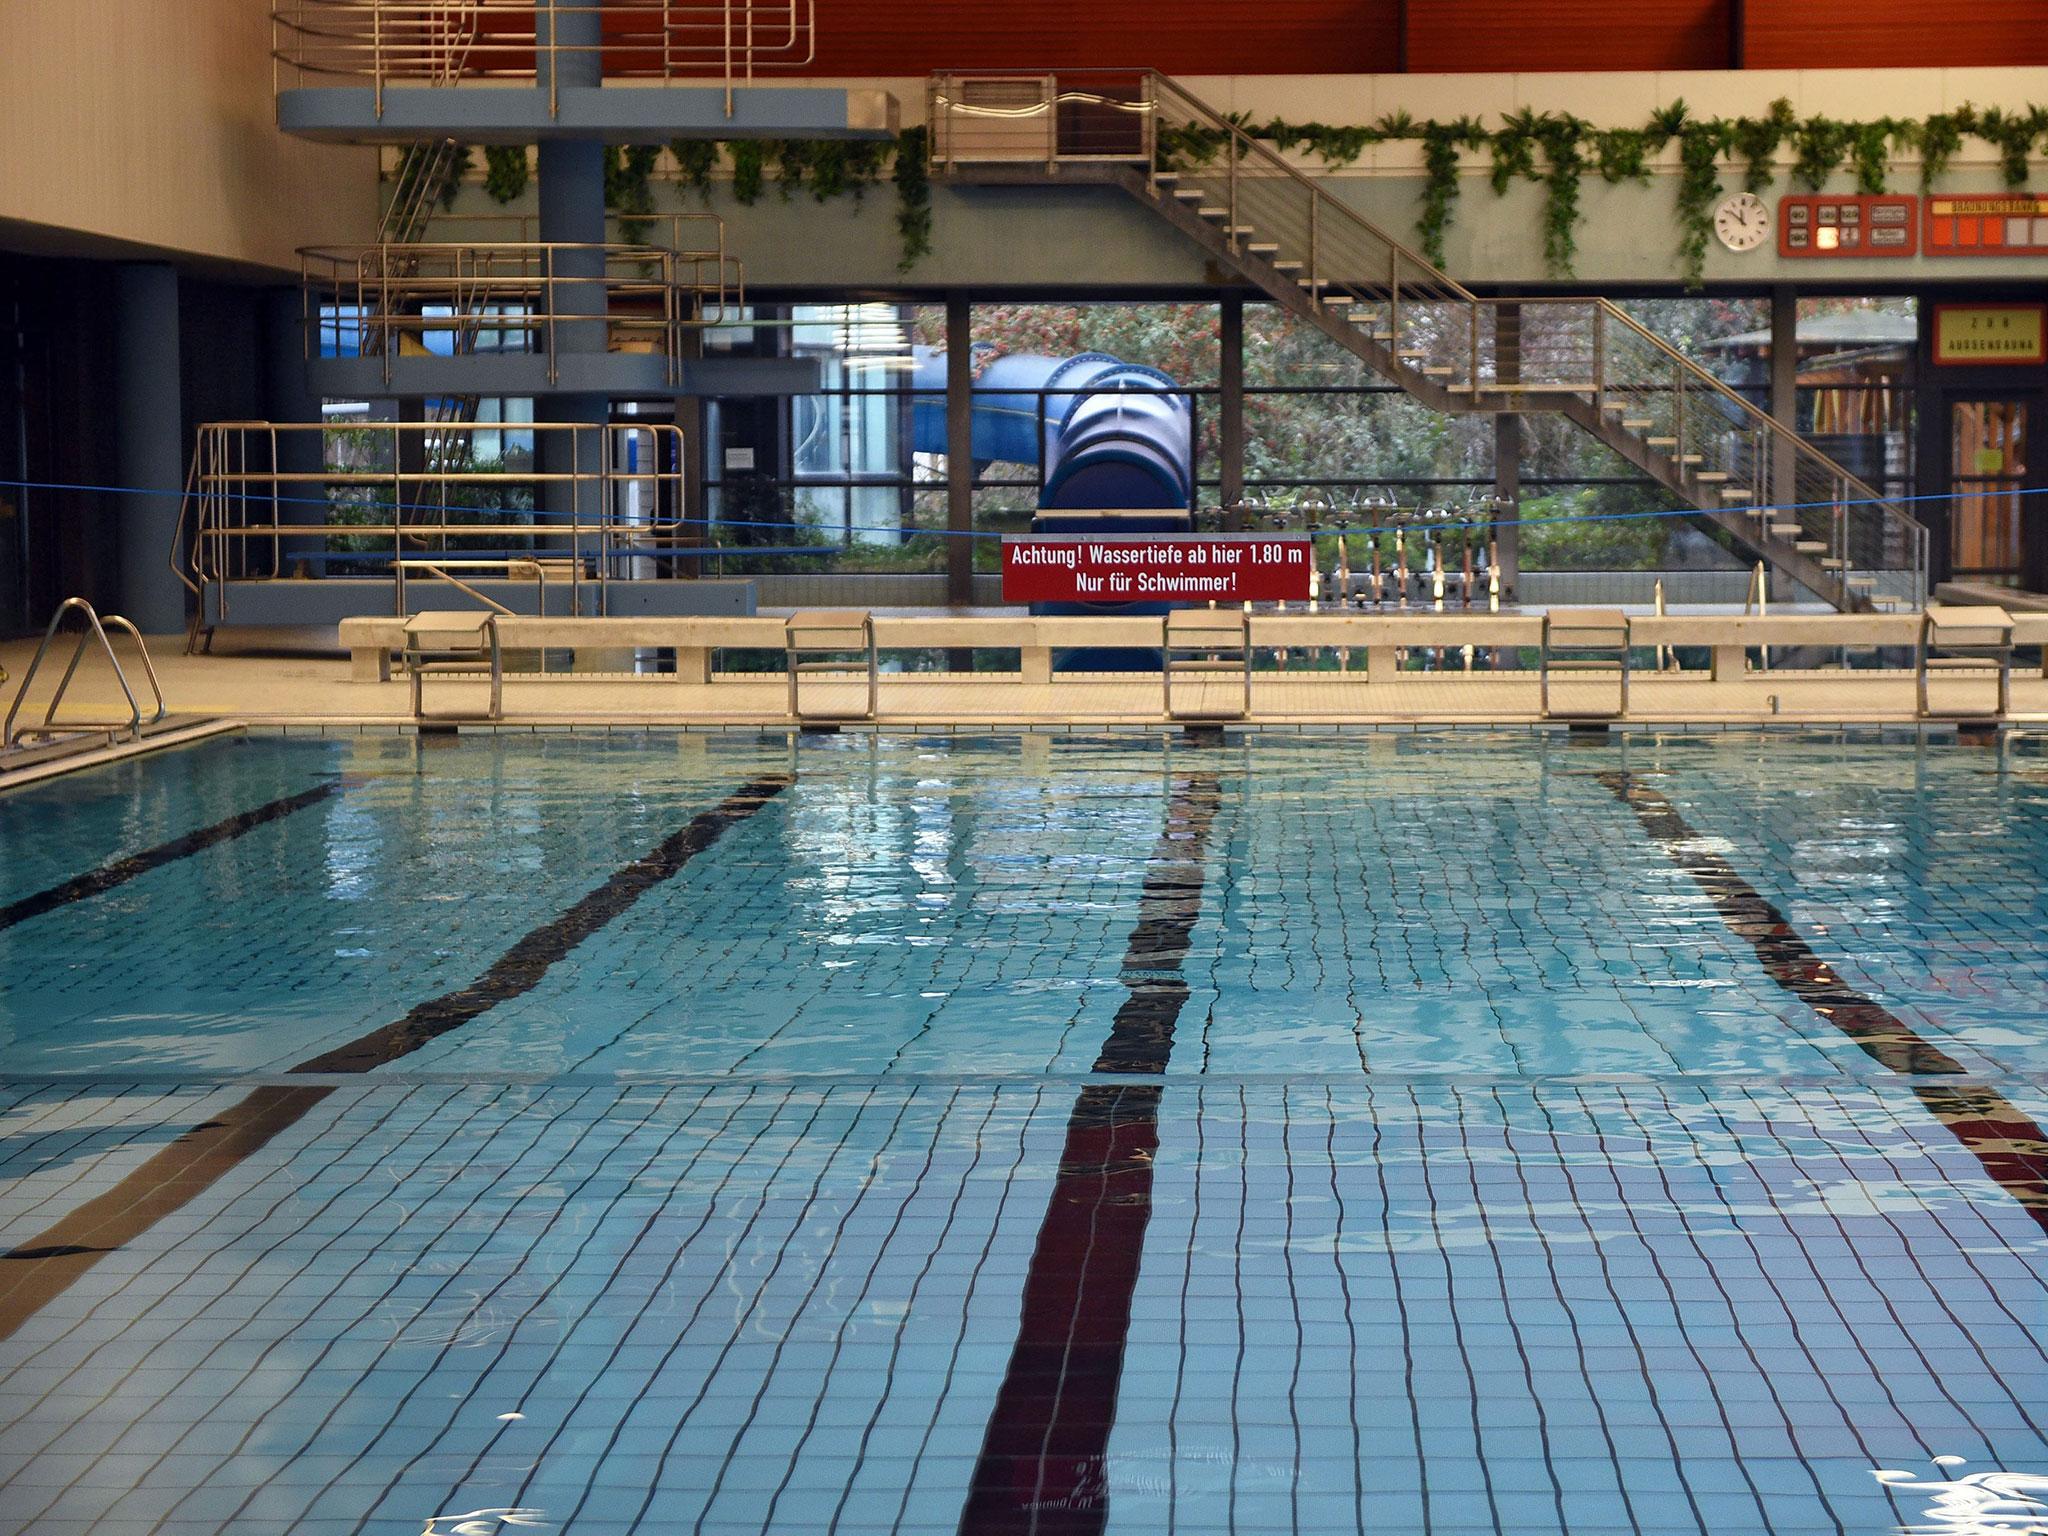 The group was formed following reports of assaults at swimming pools in Germany